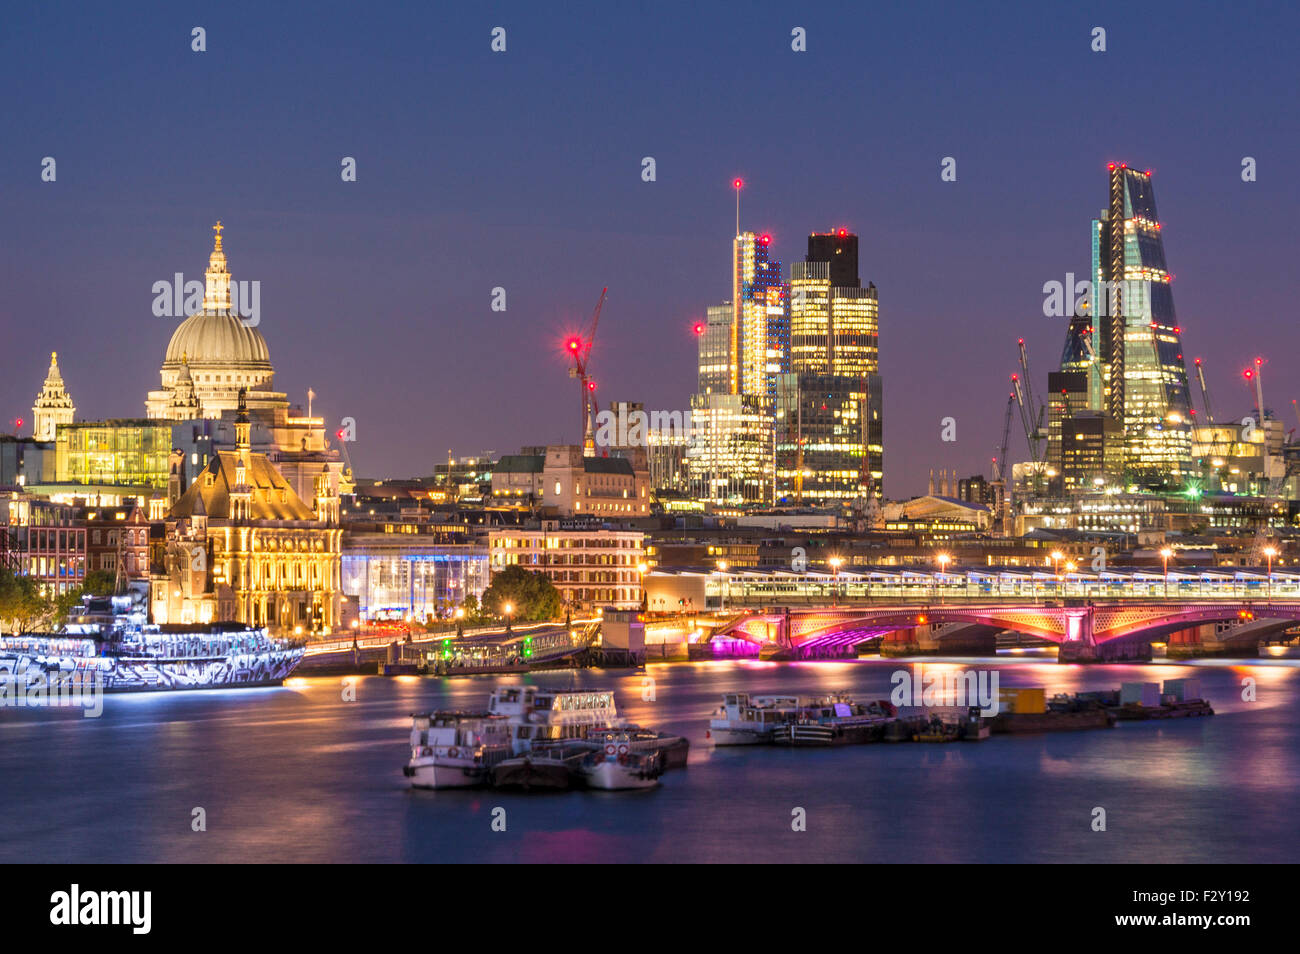 St Pauls cathedral and City of London skyline financial district at sunset River Thames City of London UK GB EU Europe Stock Photo